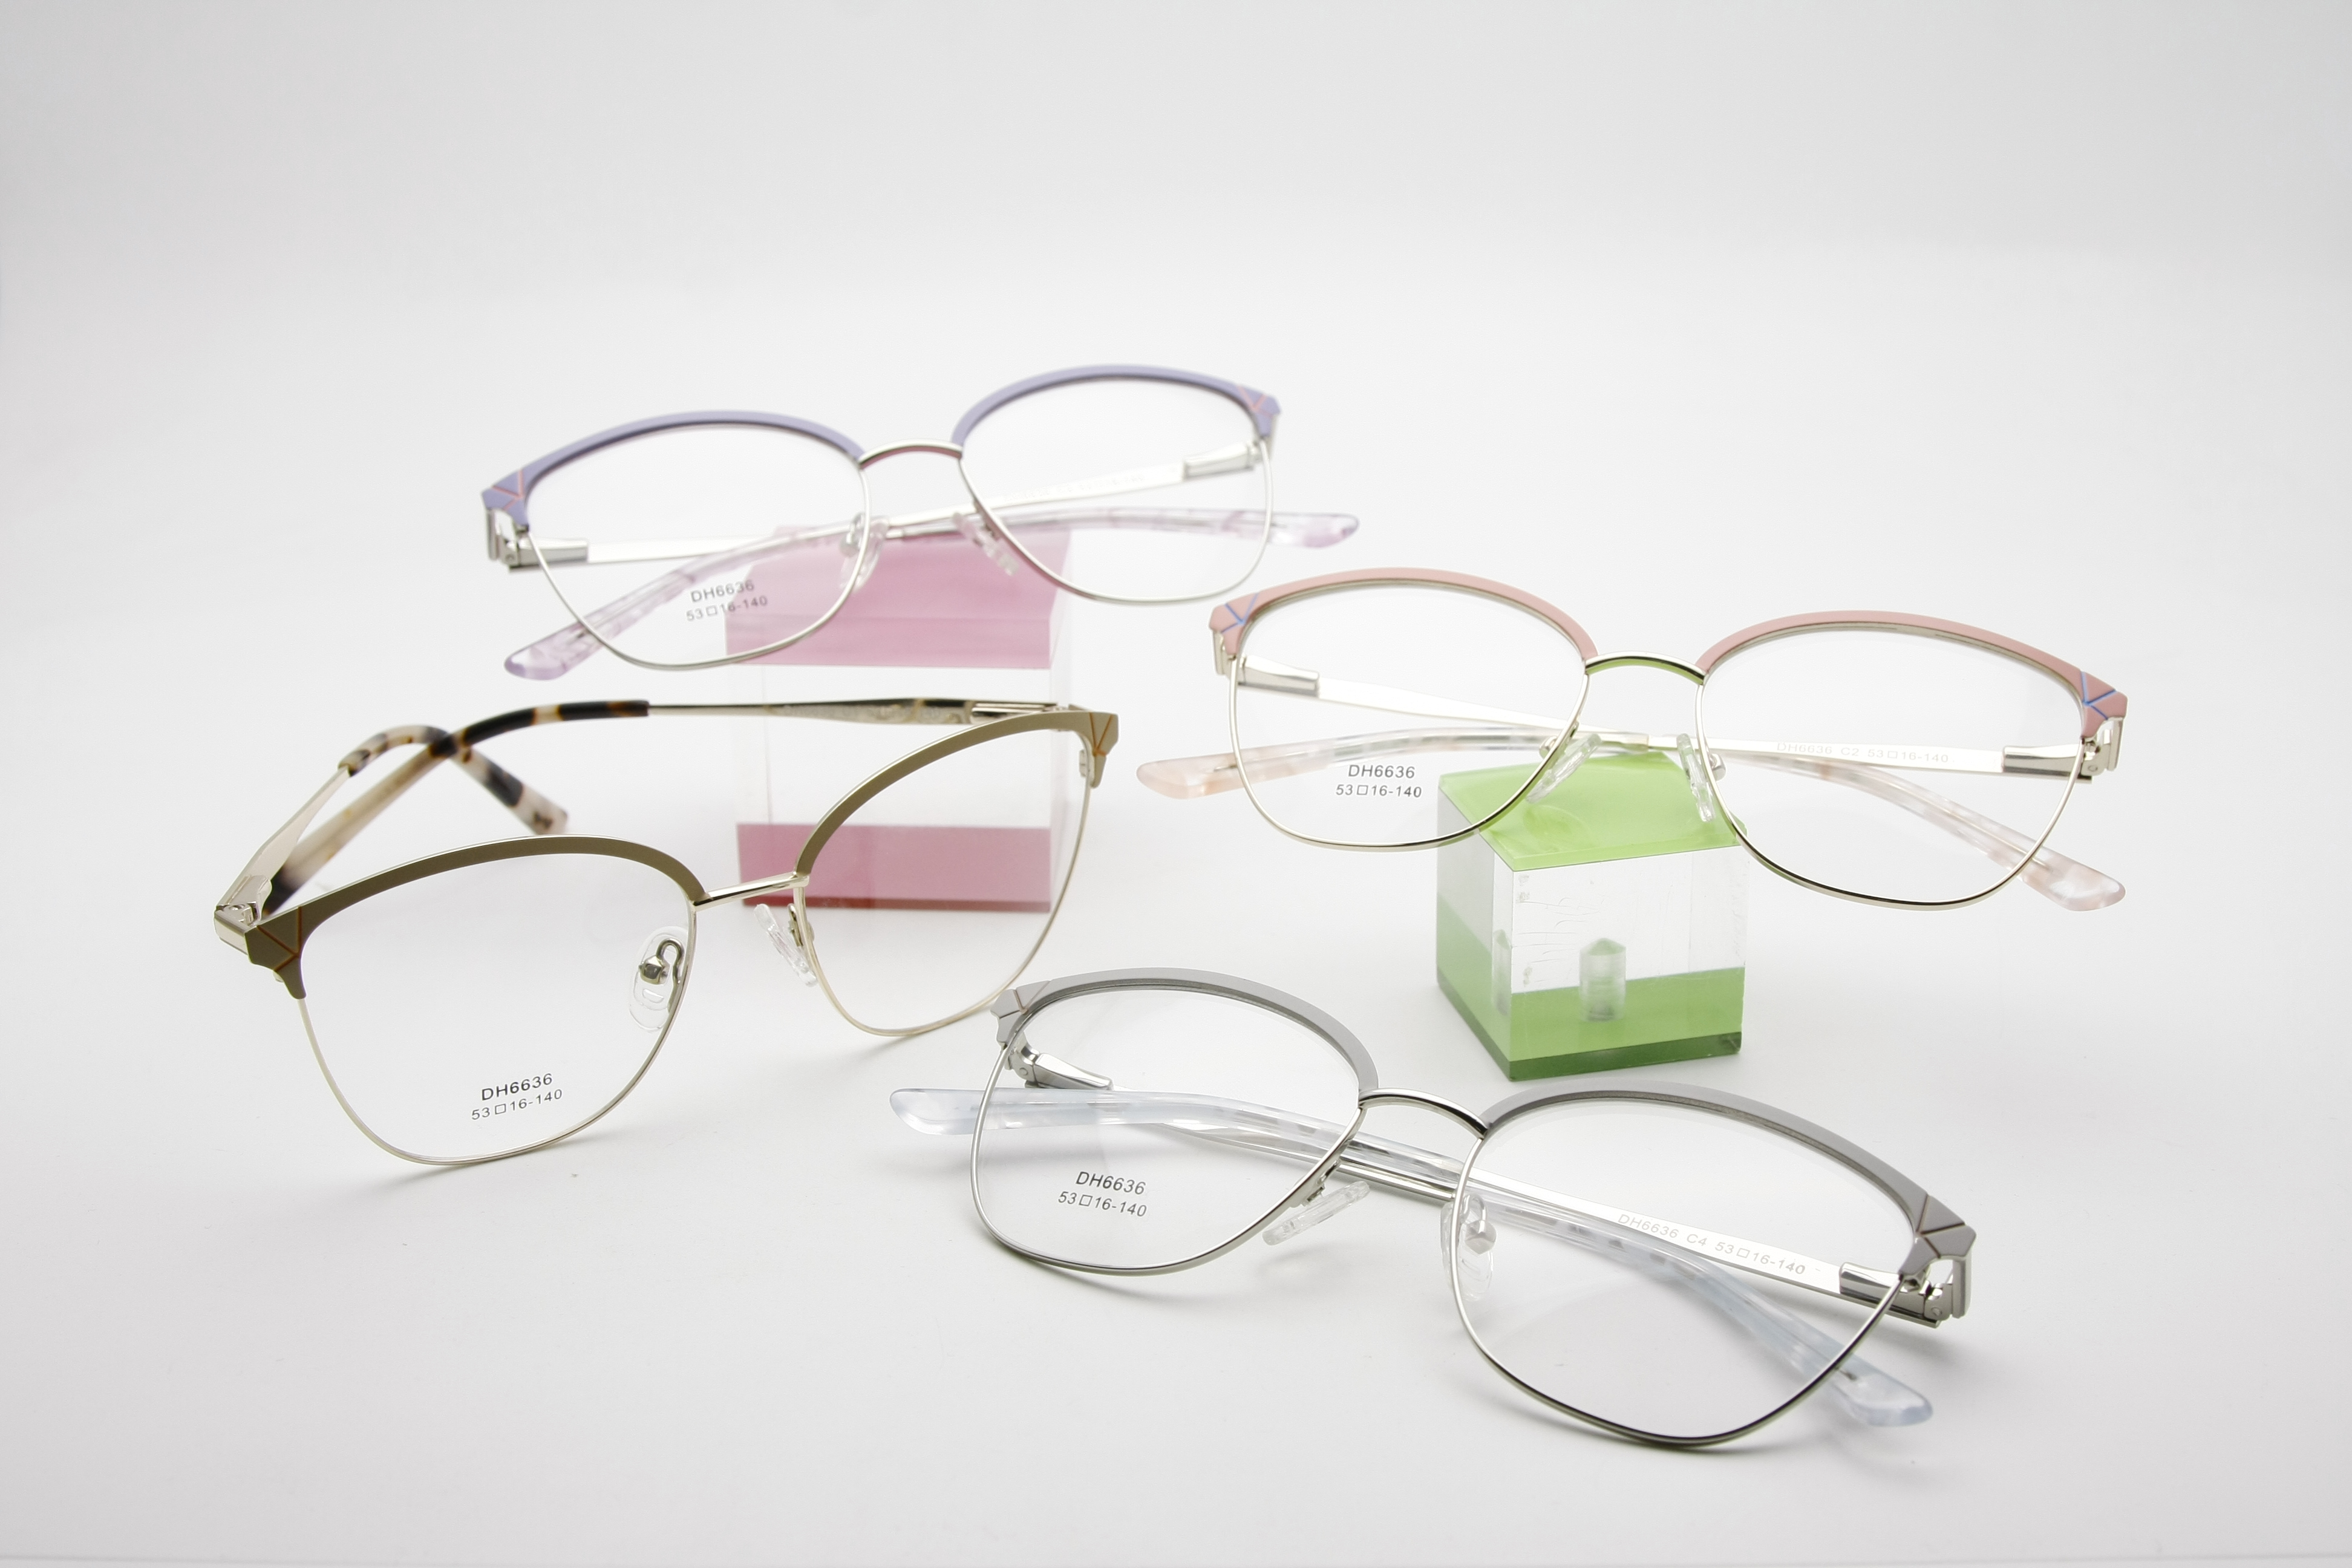 Enhance Your Vision and Eye Health with Proper Eyeglasses Discover Our Website for a World of Eyewear Solutions